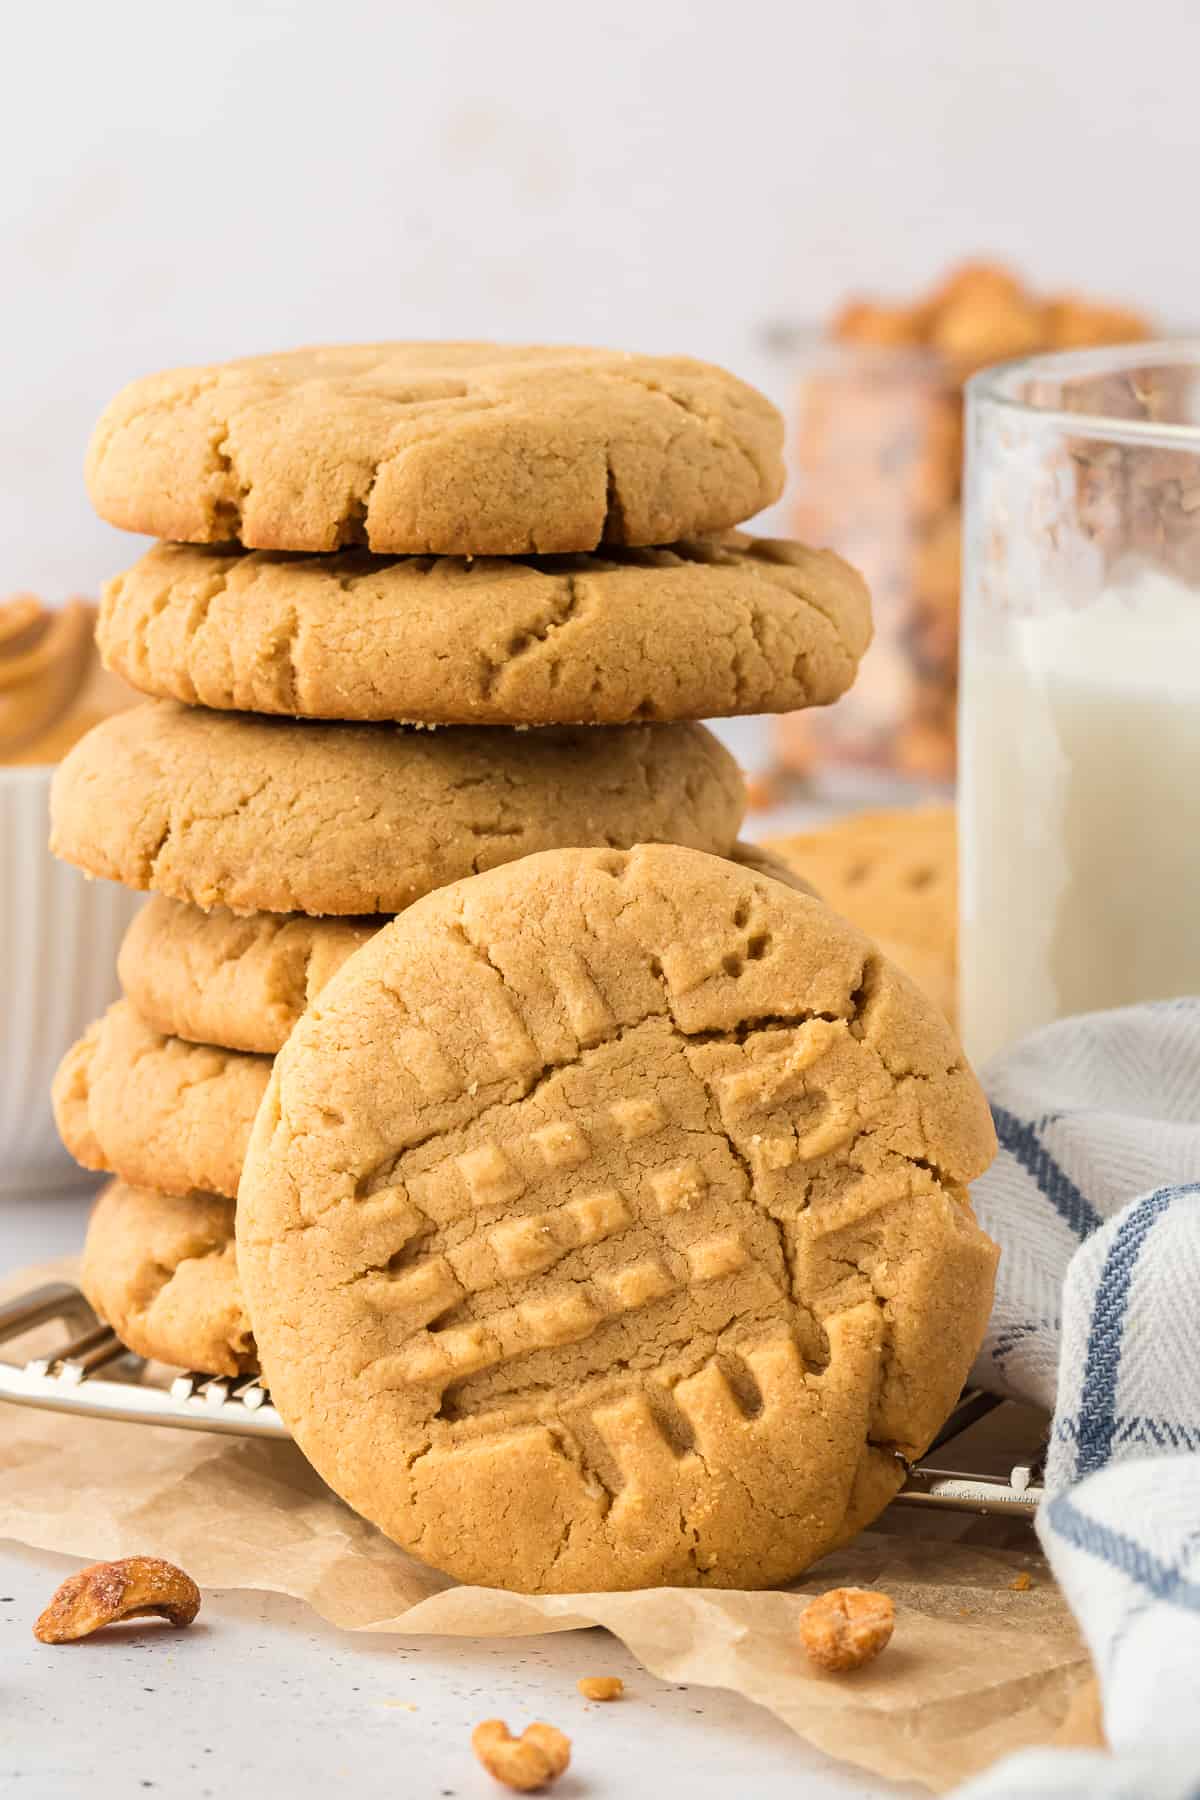 a stack of gluten free peanut butter cookies on a wire cooling rack with one cooking leaning vertically on the side of the stack, a white and blue kitchen towel, peanuts, and a glass of milk around them